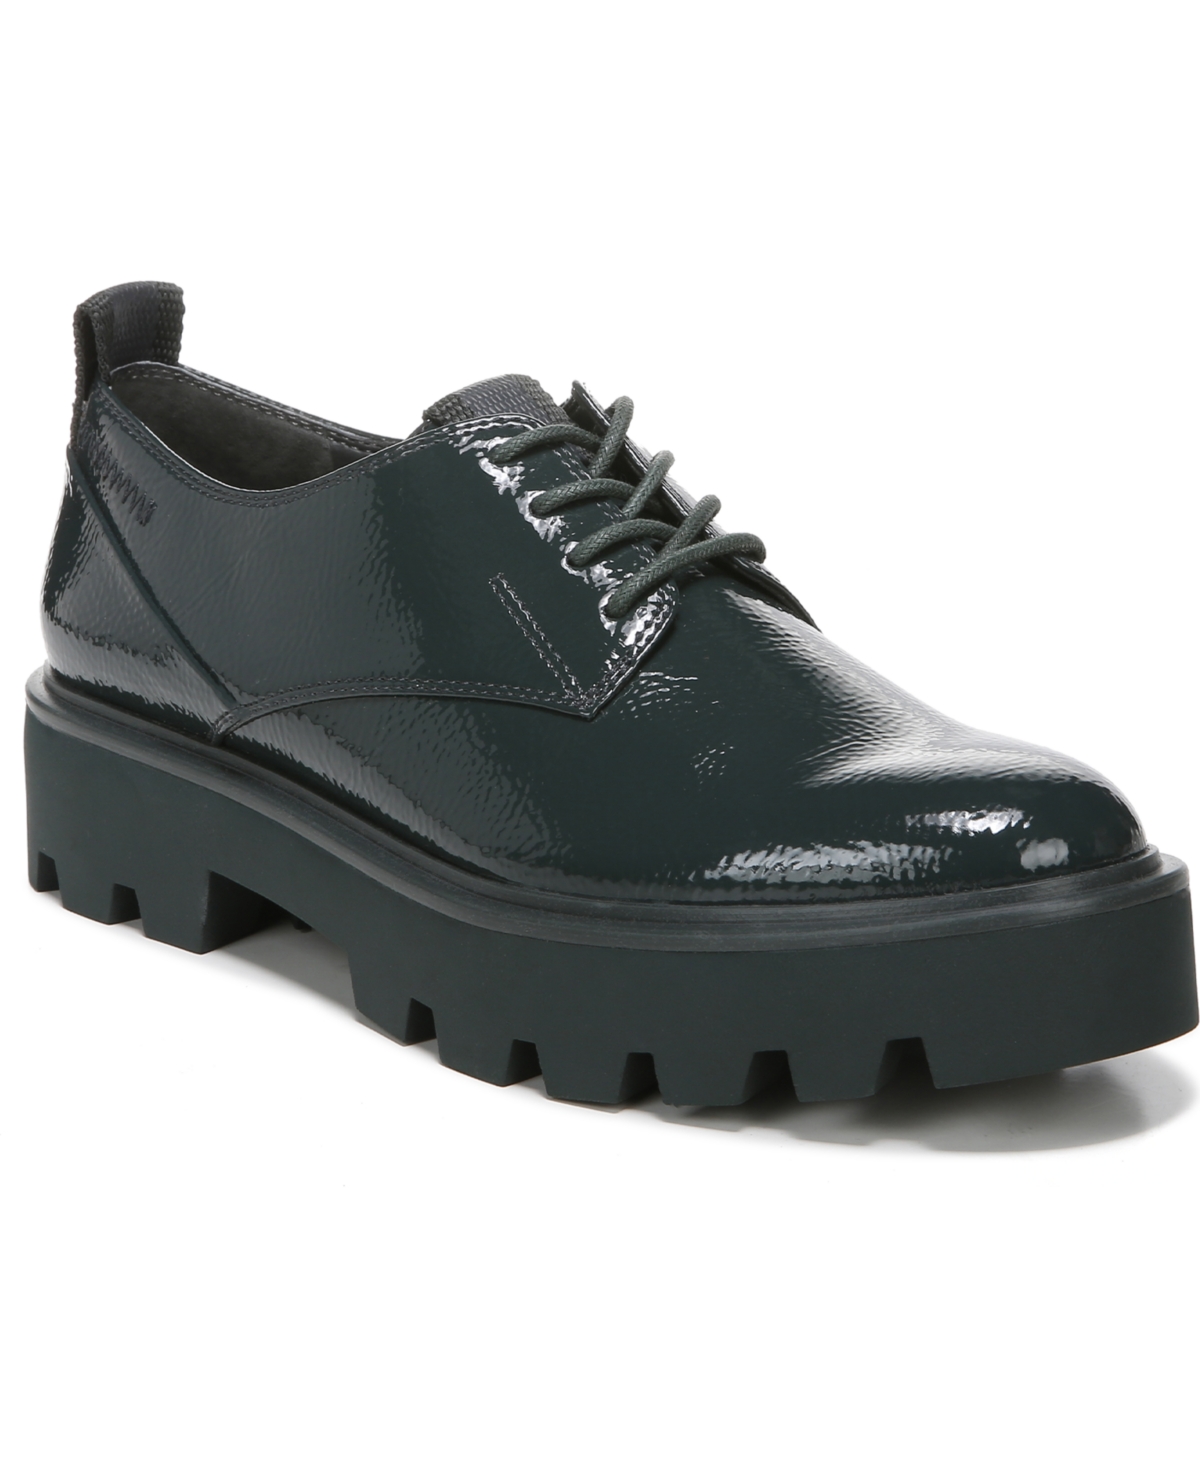 UPC 017138587471 product image for Franco Sarto Balin Laced Lug Sole Oxfords Women's Shoes | upcitemdb.com